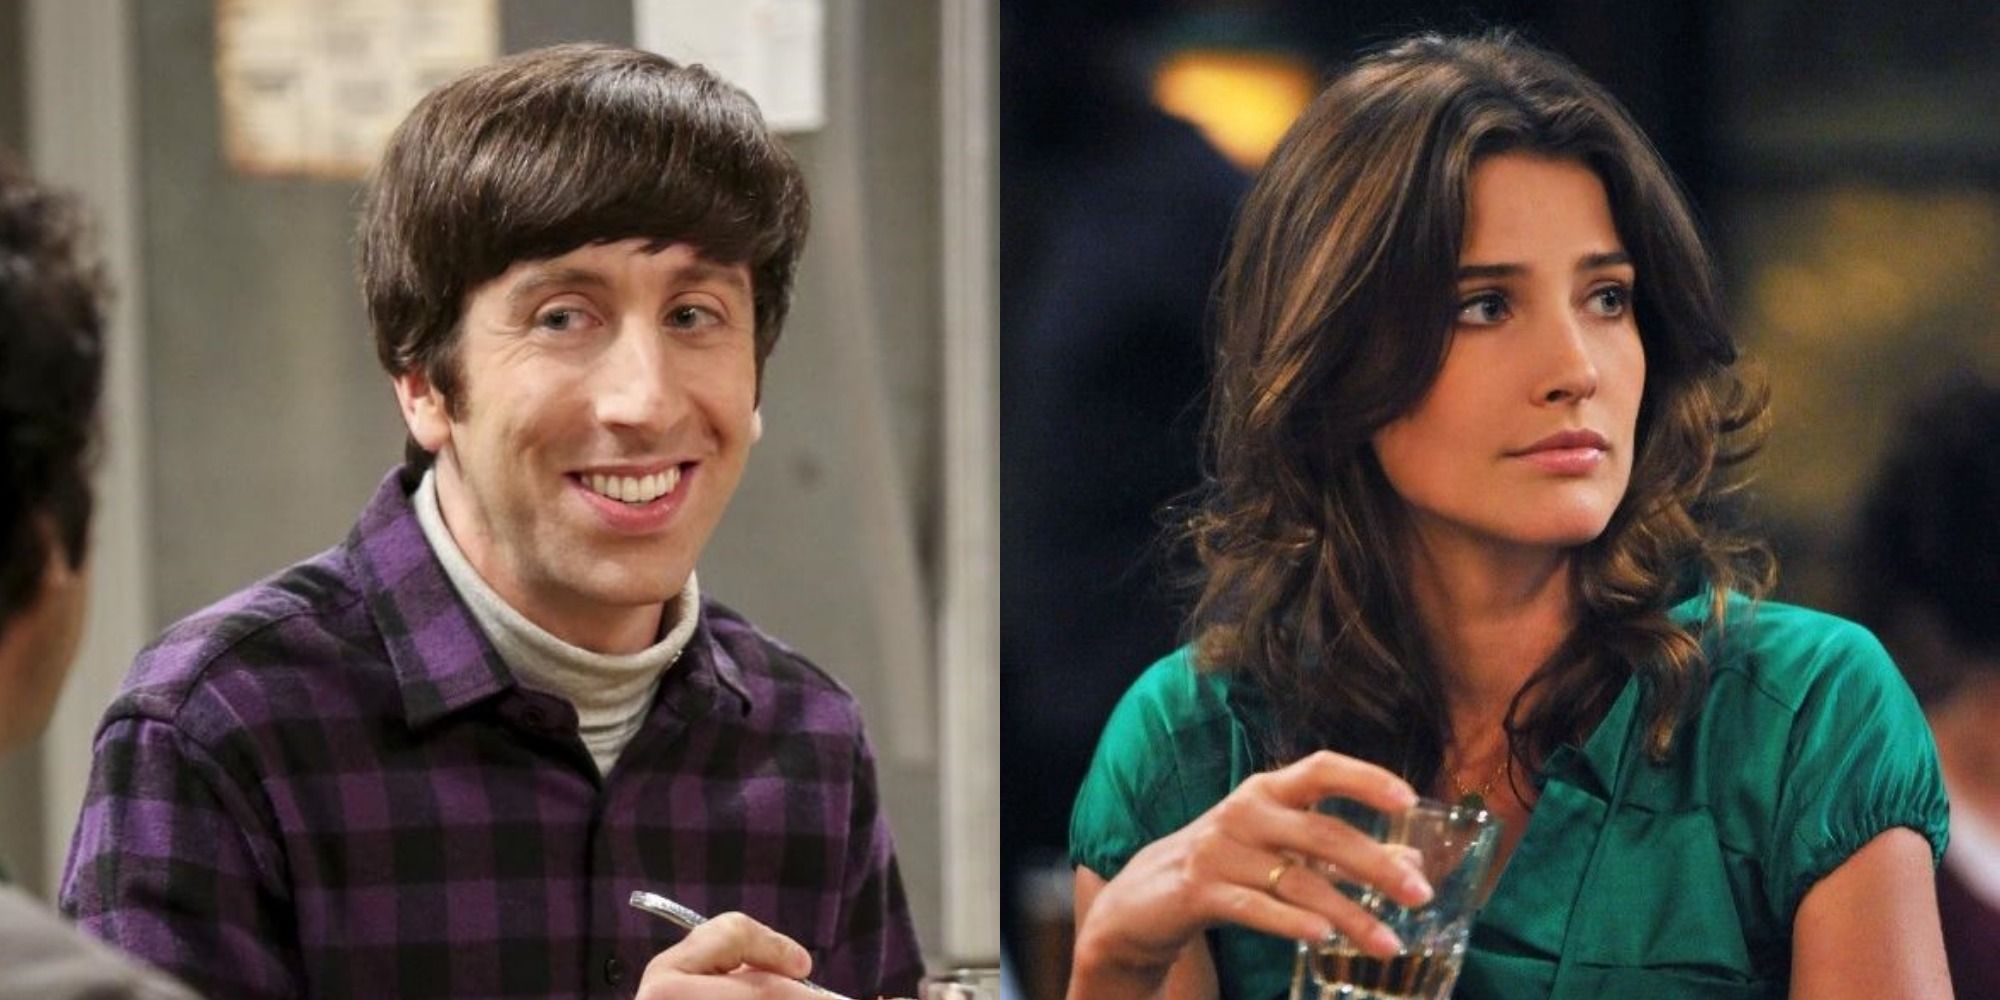 A split-screen image showing The Big Bang Theory's Howard Wolowitz and How I Met Your Mother's Robin Scherbatsky